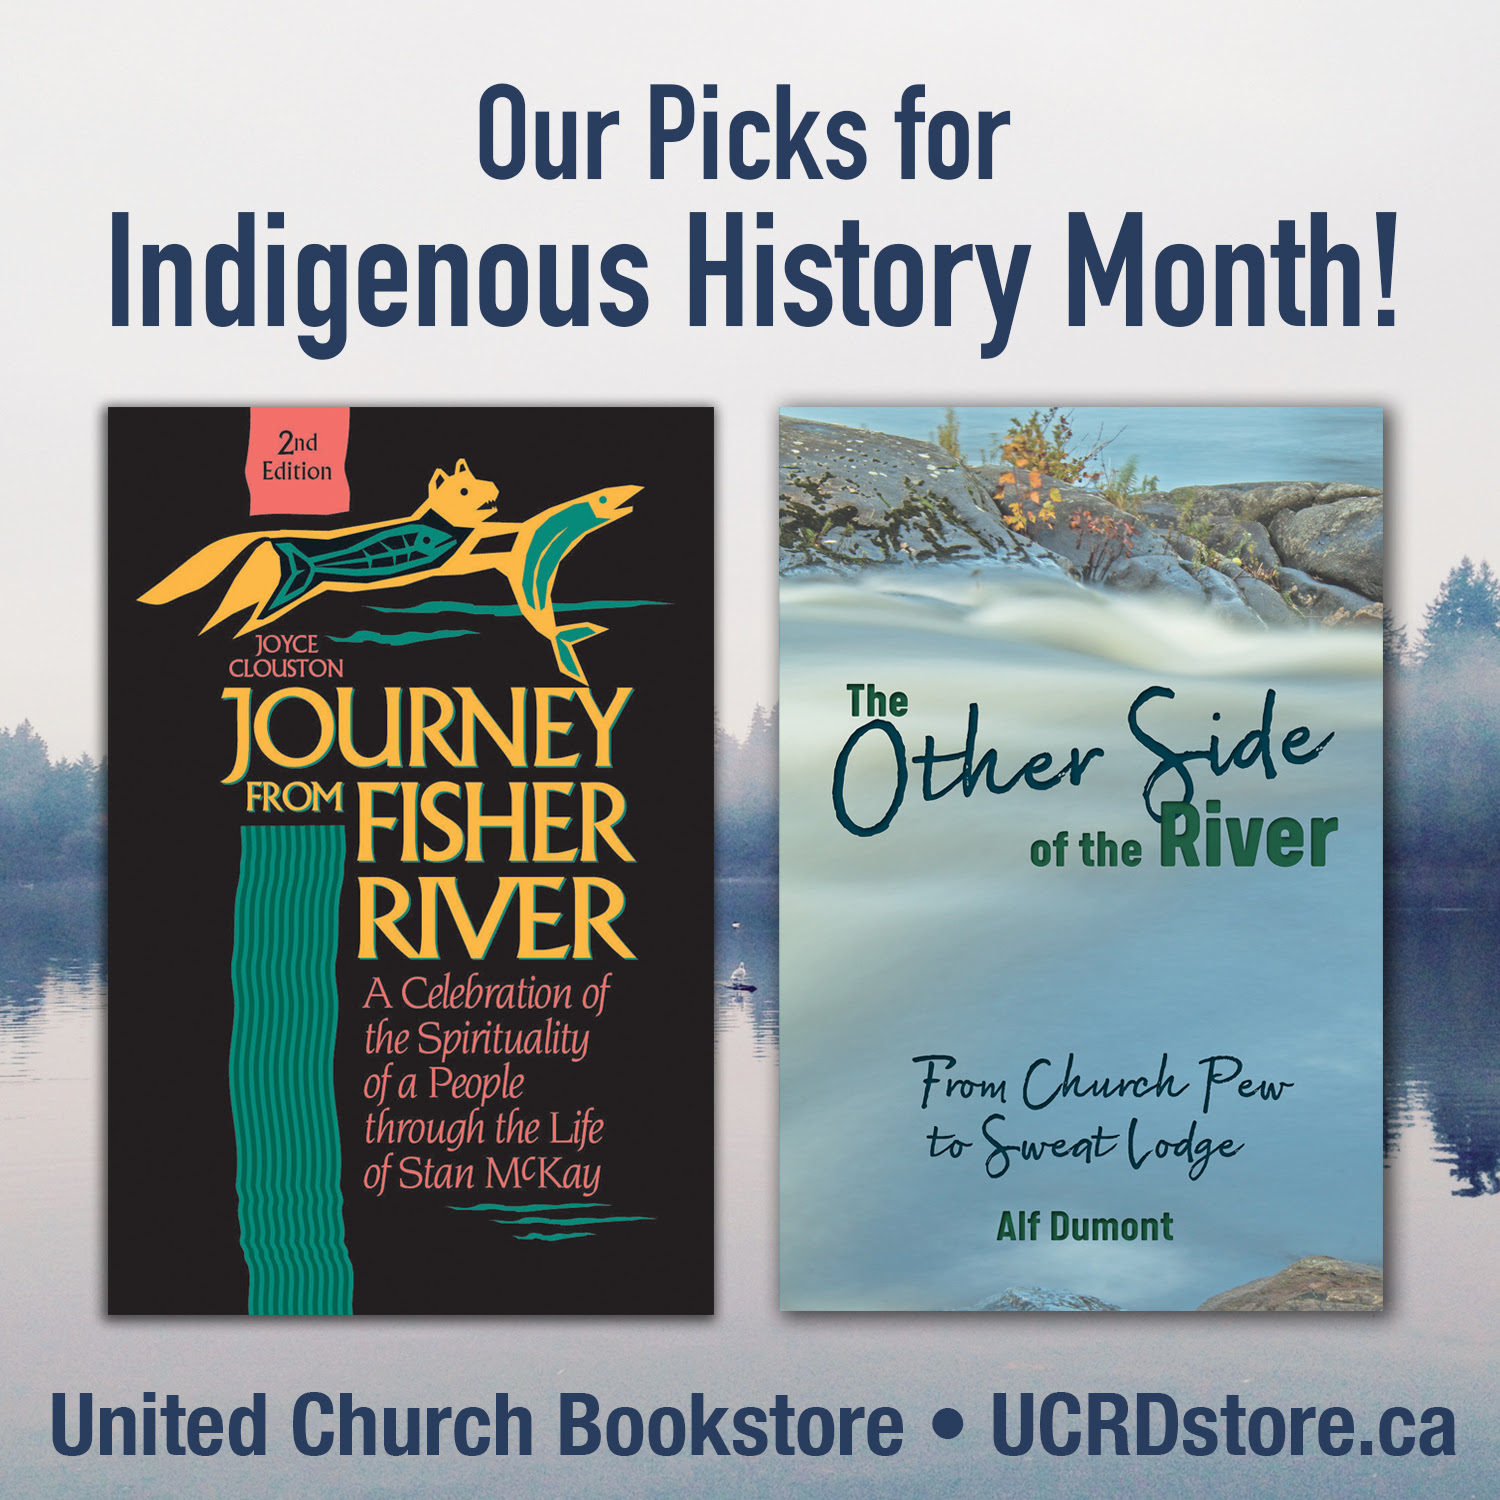 Our Picks for Indigenous History Month